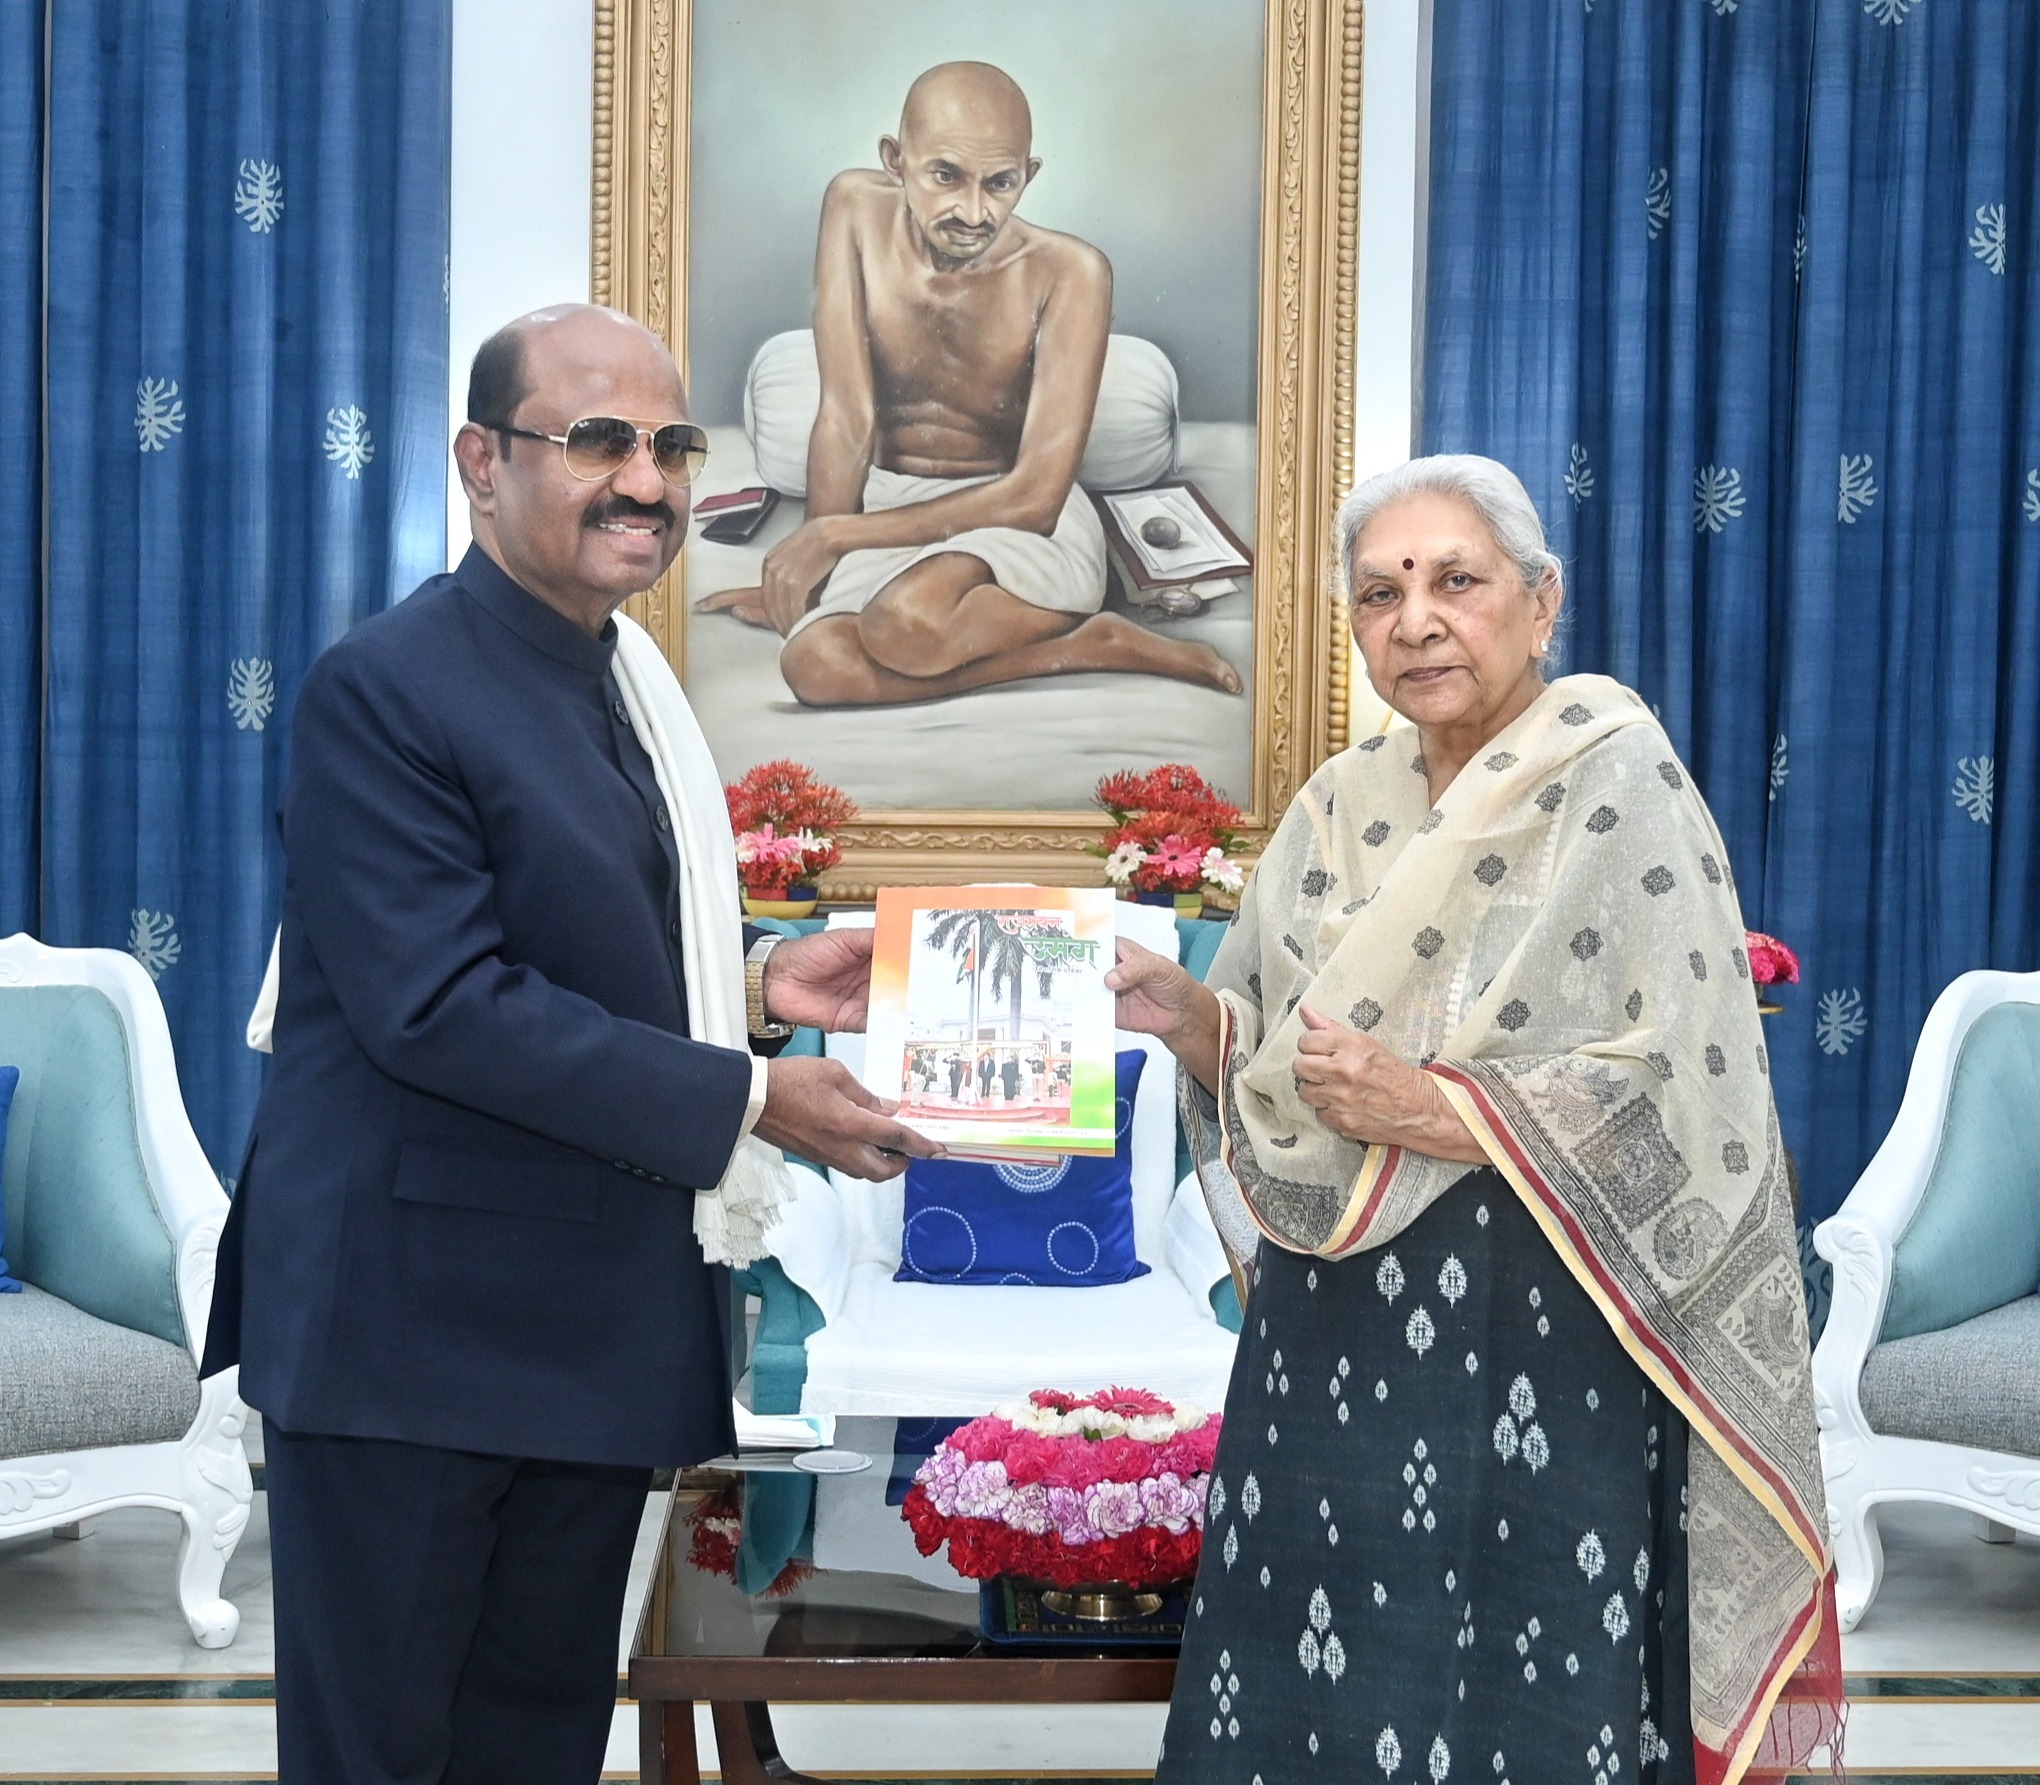 Courtesy meeting of Governor of West Bengal Dr C V Anand Bose at Raj Bhavan Lucknow with Governor Smt Anandiben Patel today